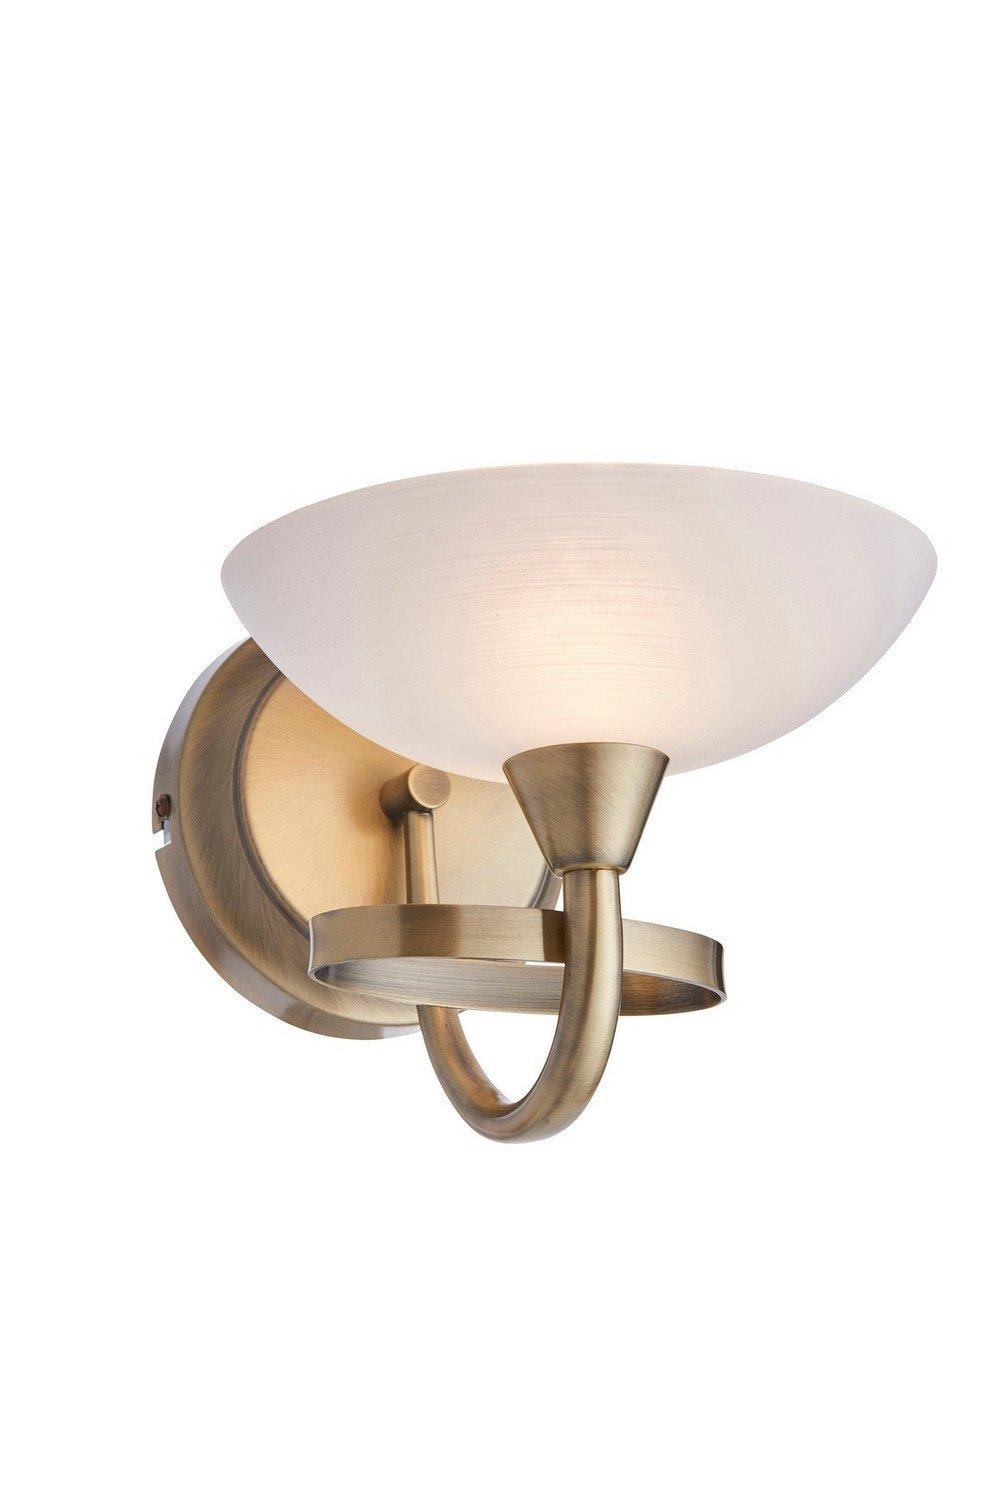 Cagney 1 Light Wall Light Antique Brass with White Glass Shade G9